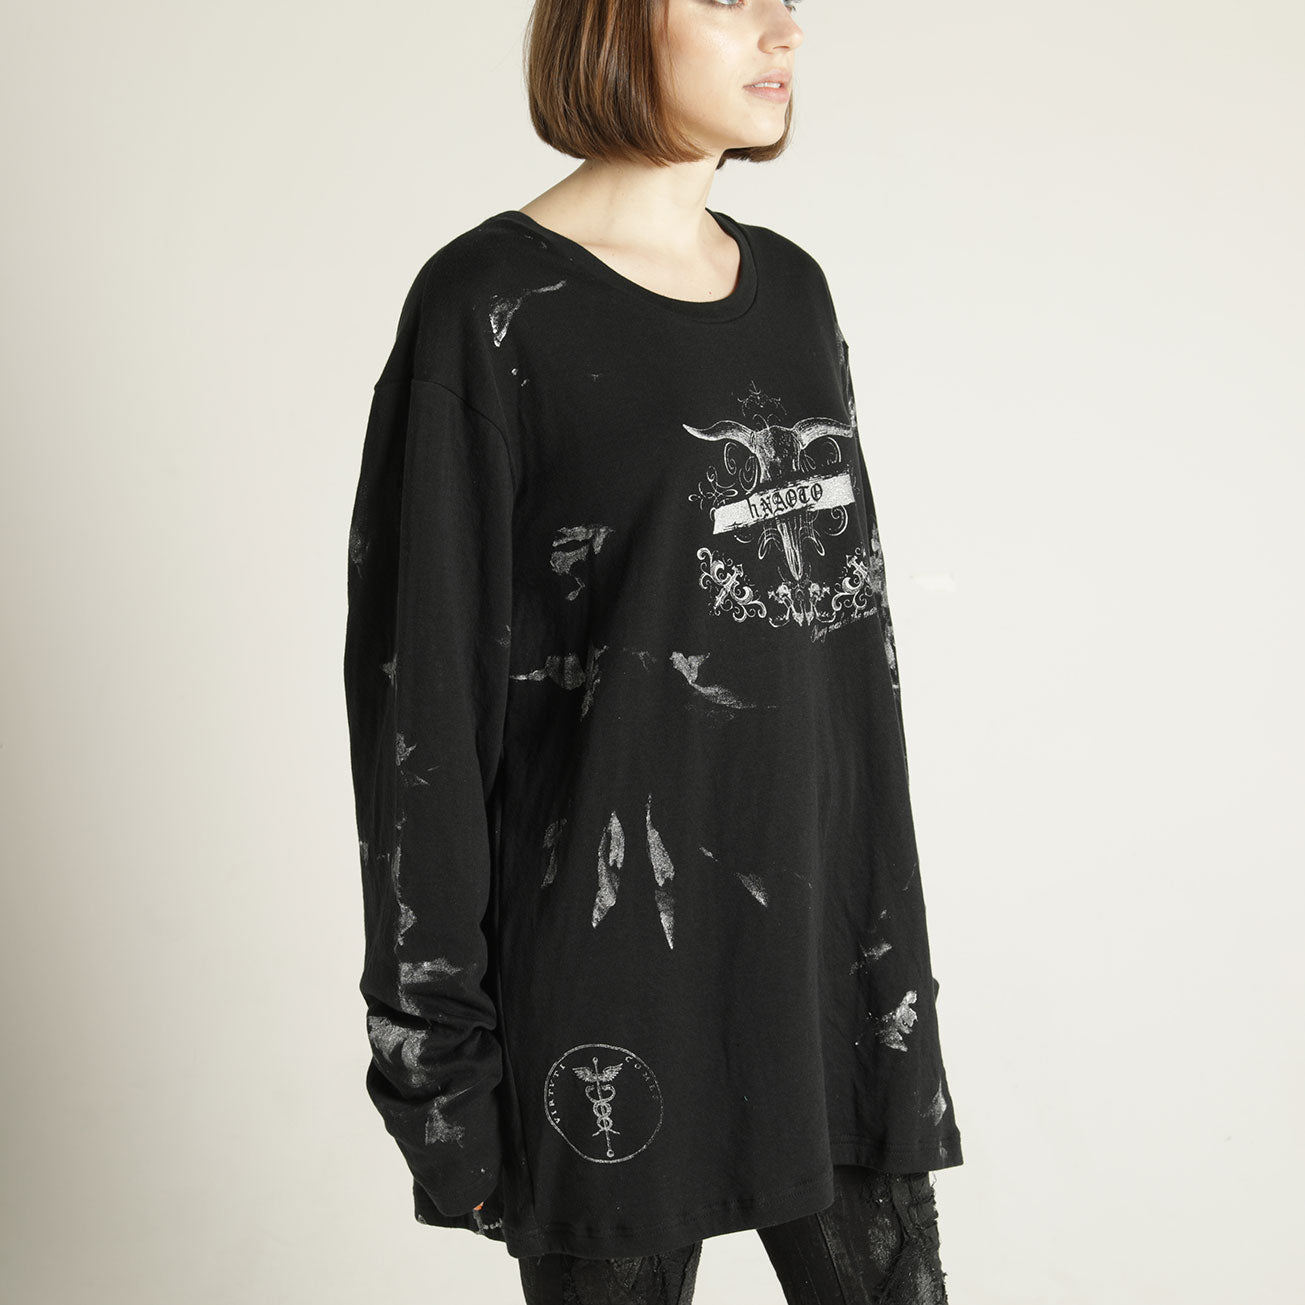 Ultra L Silhouette Gothic Tops